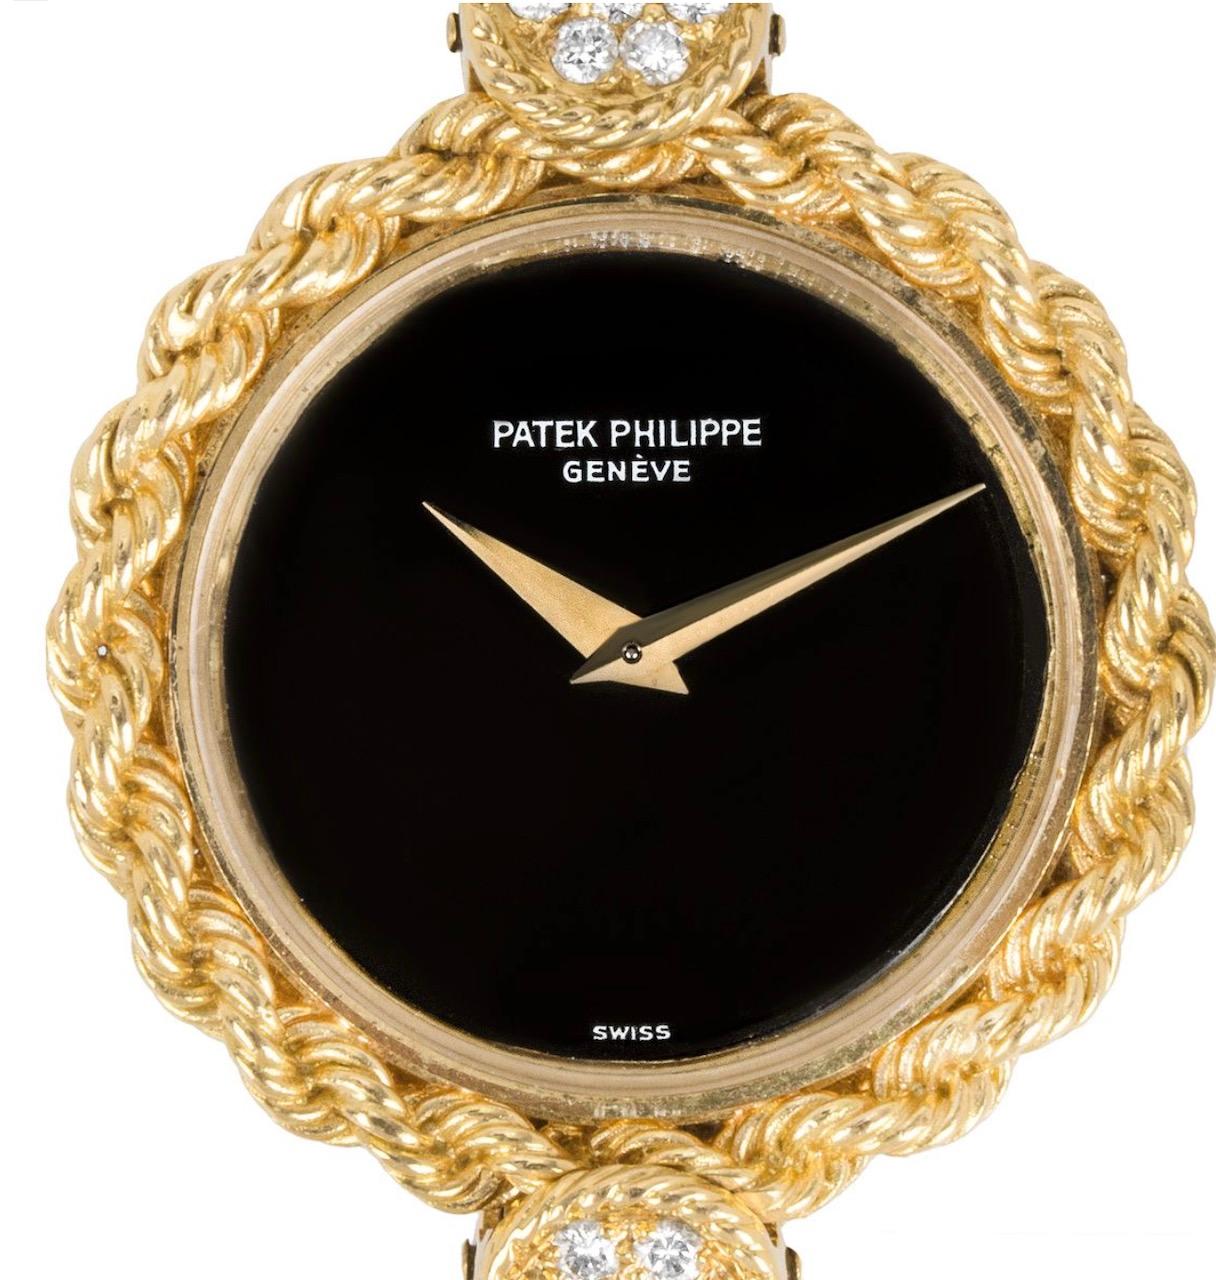 A striking vintage ladies dress watch crafted in yellow gold by Patek Philippe. Featuring a distinctive black onyx dial with a twisted golden rope bezel.

The bracelet is equipped with a disk-like link set with an onyx and malachite design which is